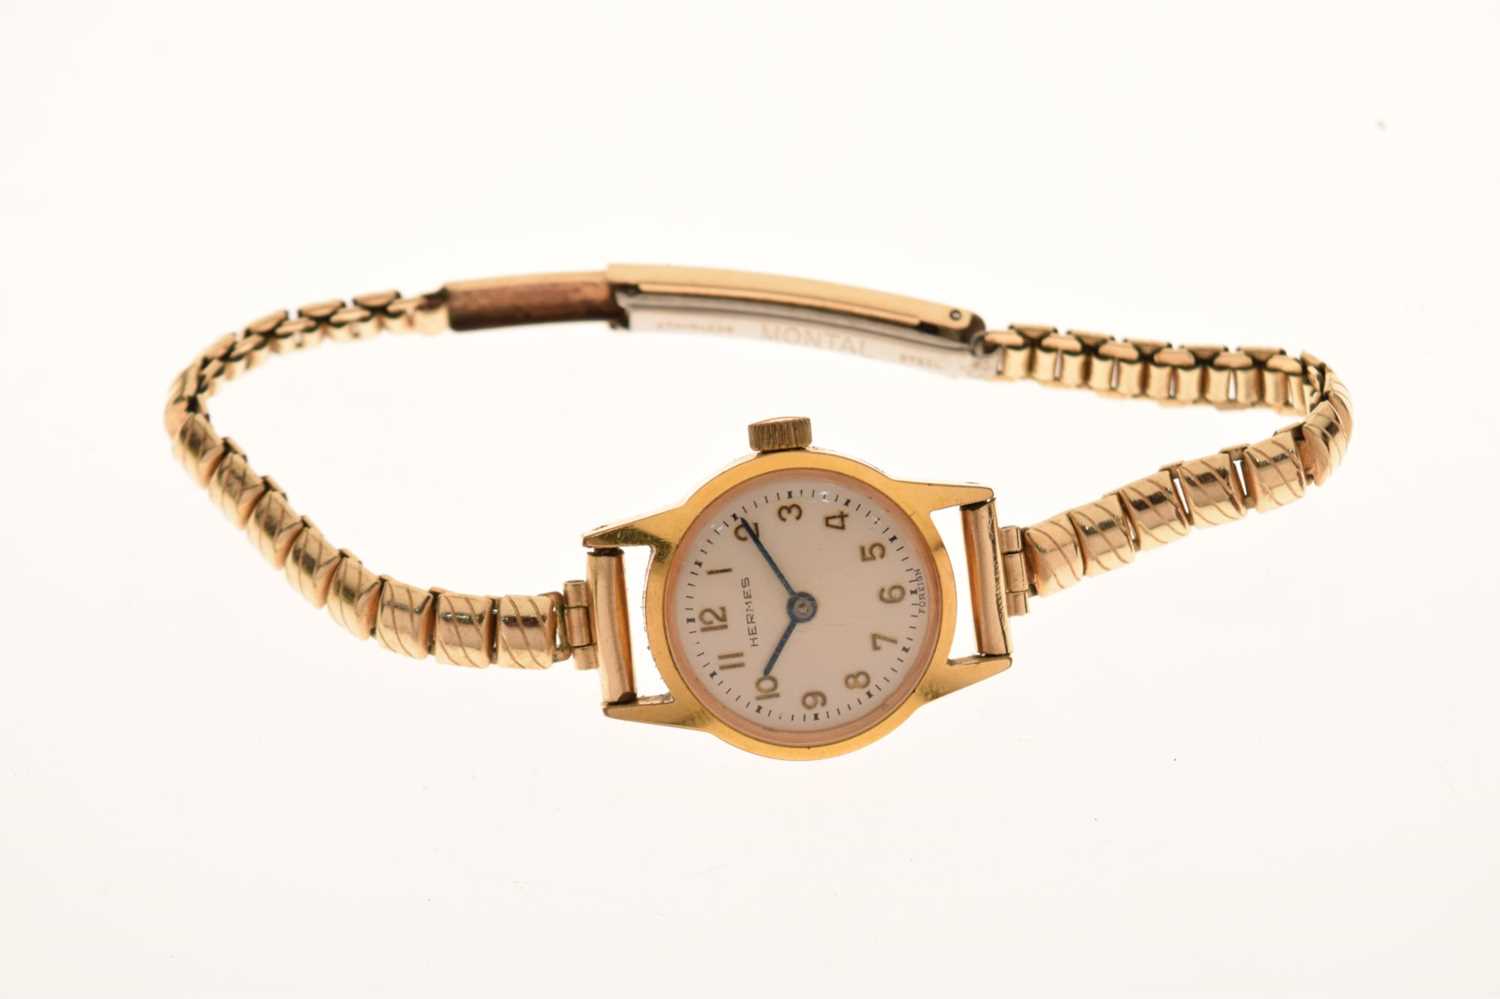 Hermes - Lady's gold plated cocktail watch - Image 4 of 7